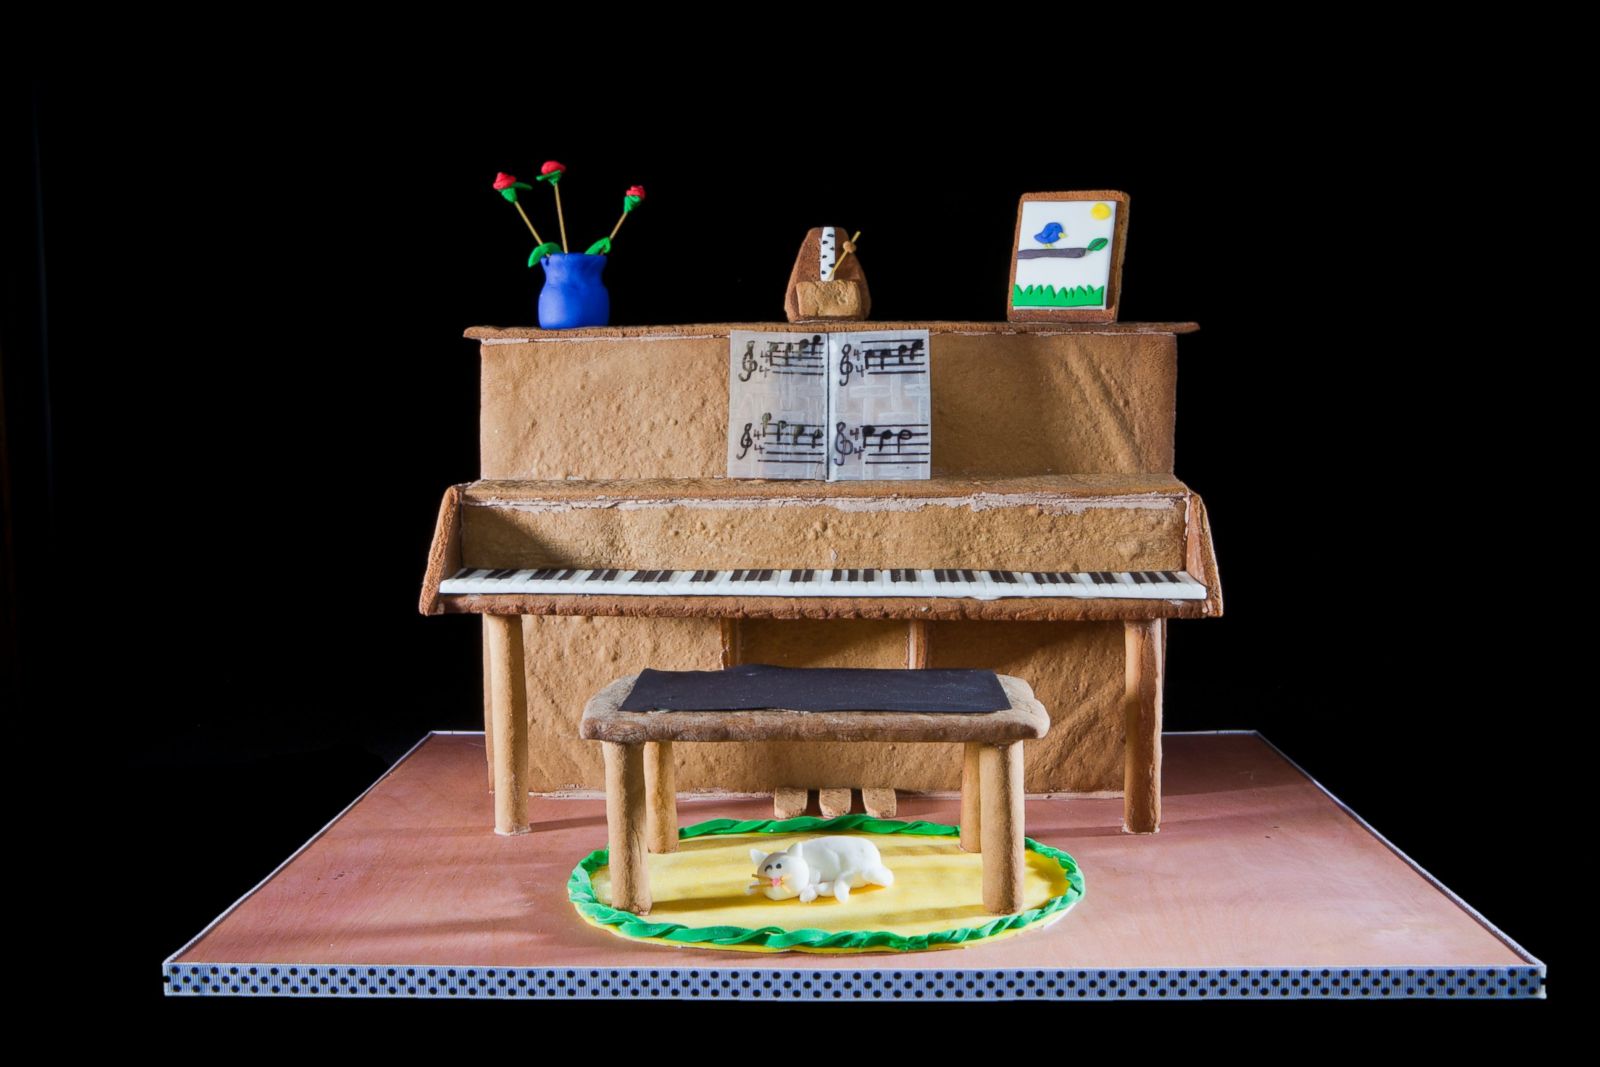 Coolest Homemade Grand Piano Cake (That Almost Bombed!)